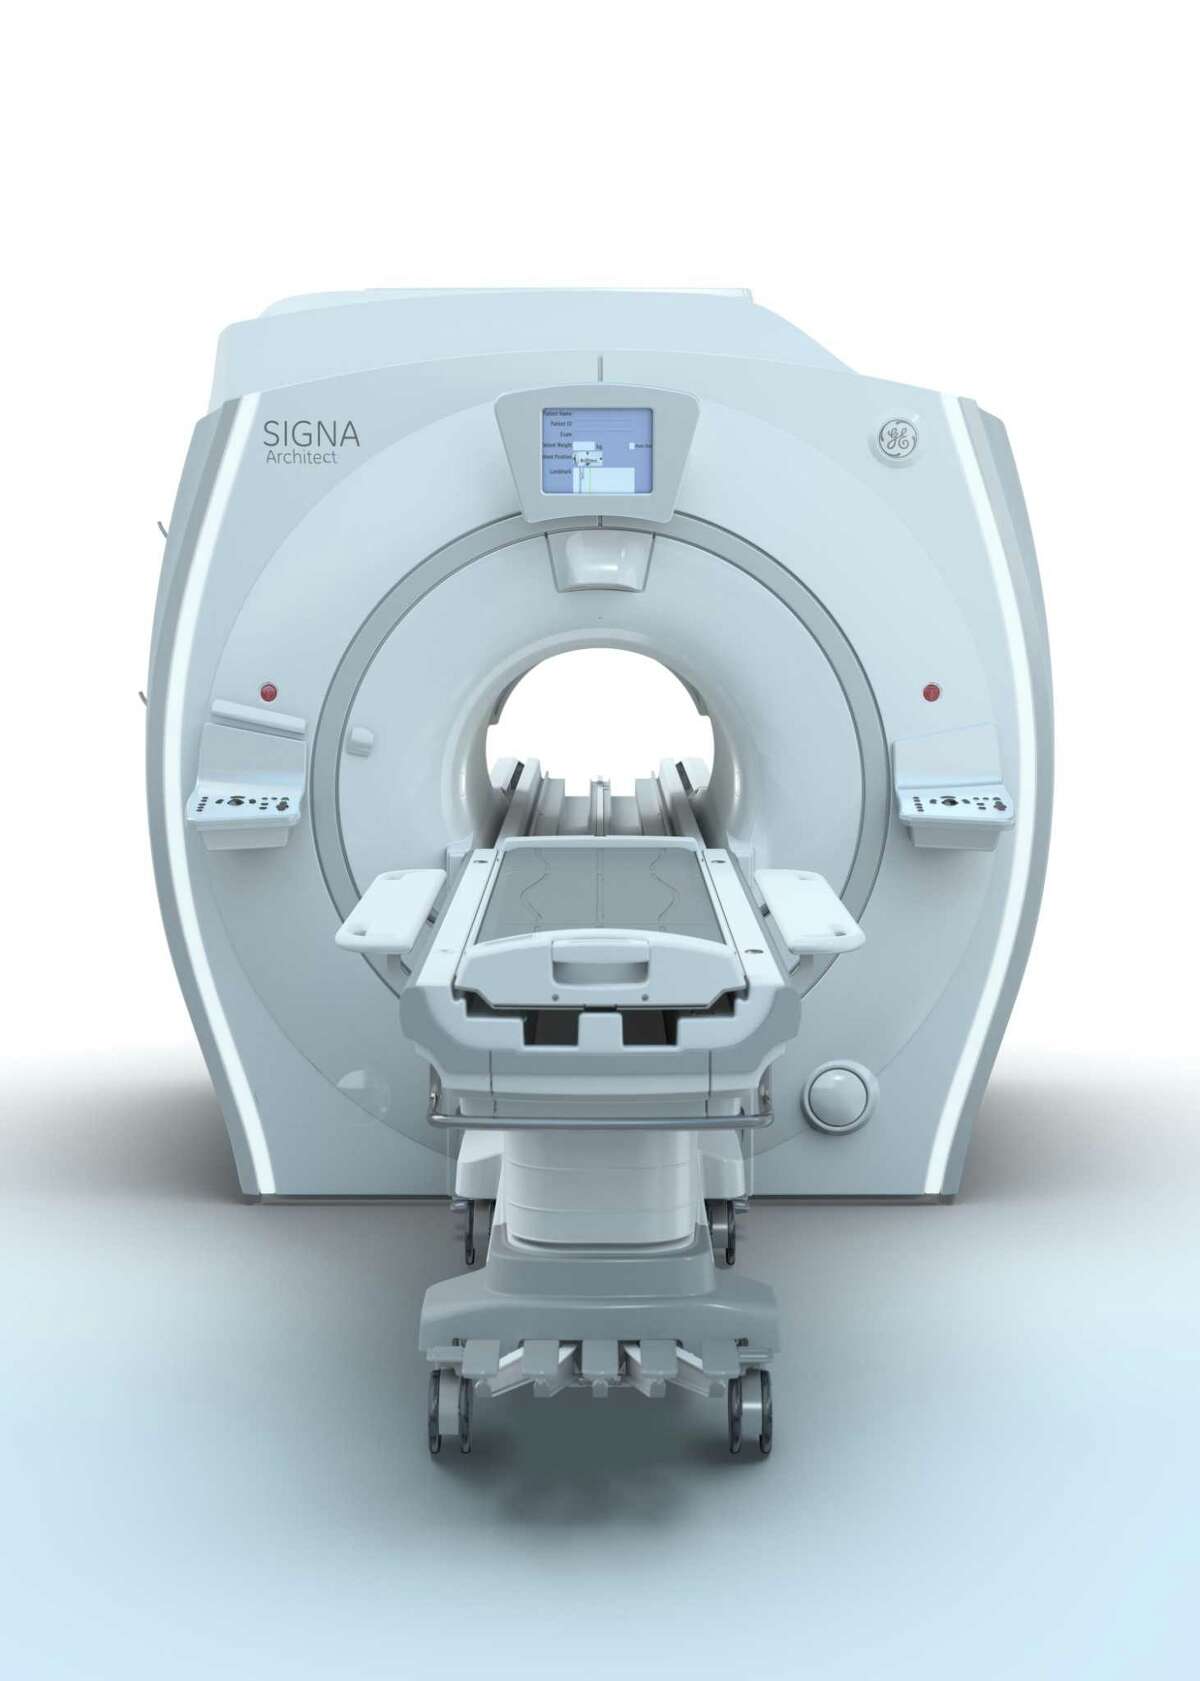 Shown here is a 3T MRI machine, similar to the one used by Houston Methodist Sugar Land Hospital to provide a new level of patient comfort.